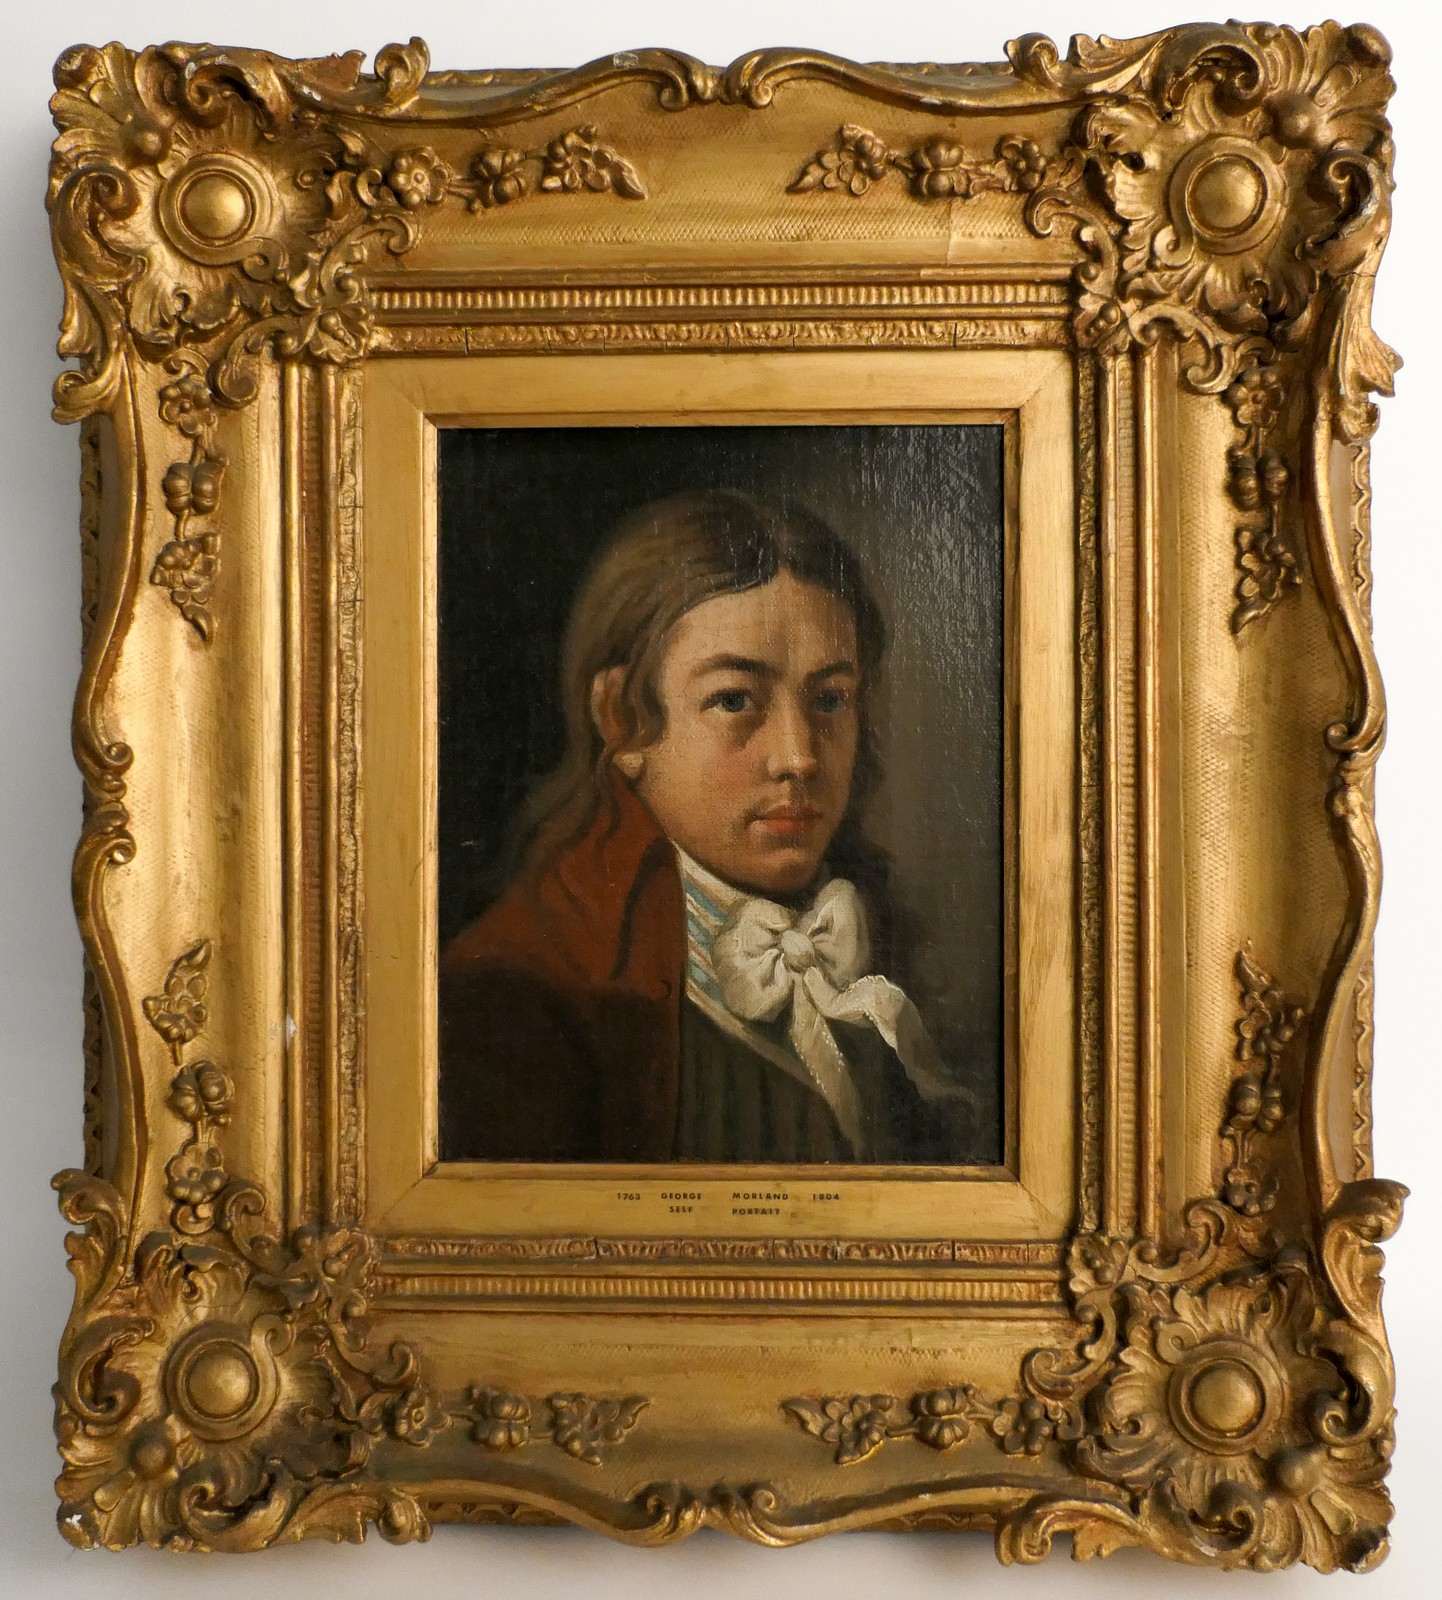 Unsigned, attributed to George Morland, portrait of a men, oil on canvas, early 19thC, 18,1 x 23,2 - Image 2 of 6